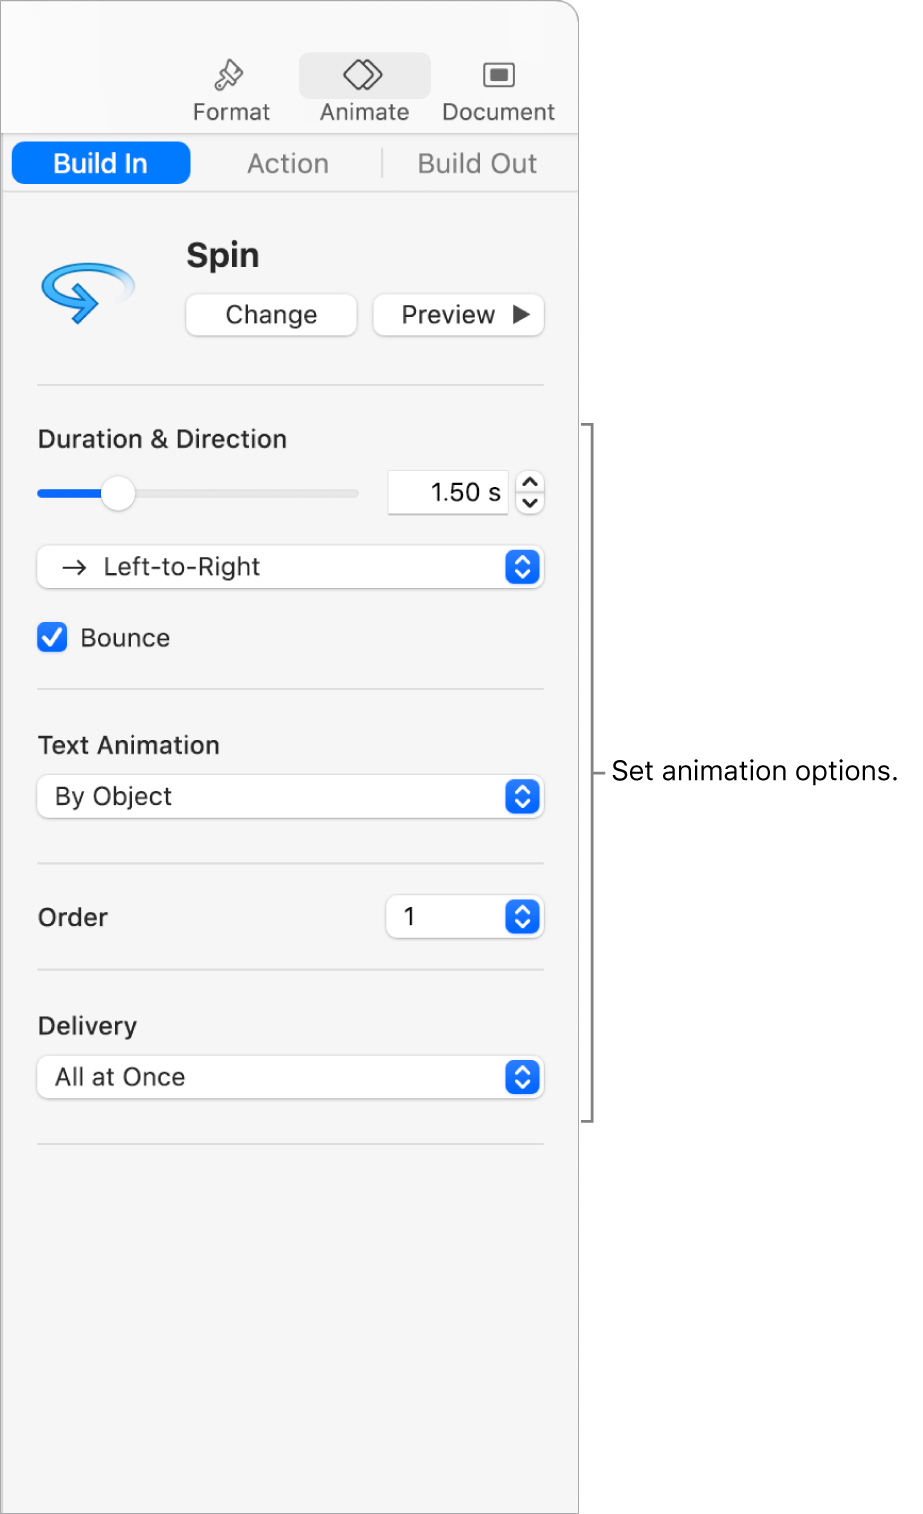 Build in options in the Animate section of the sidebar.